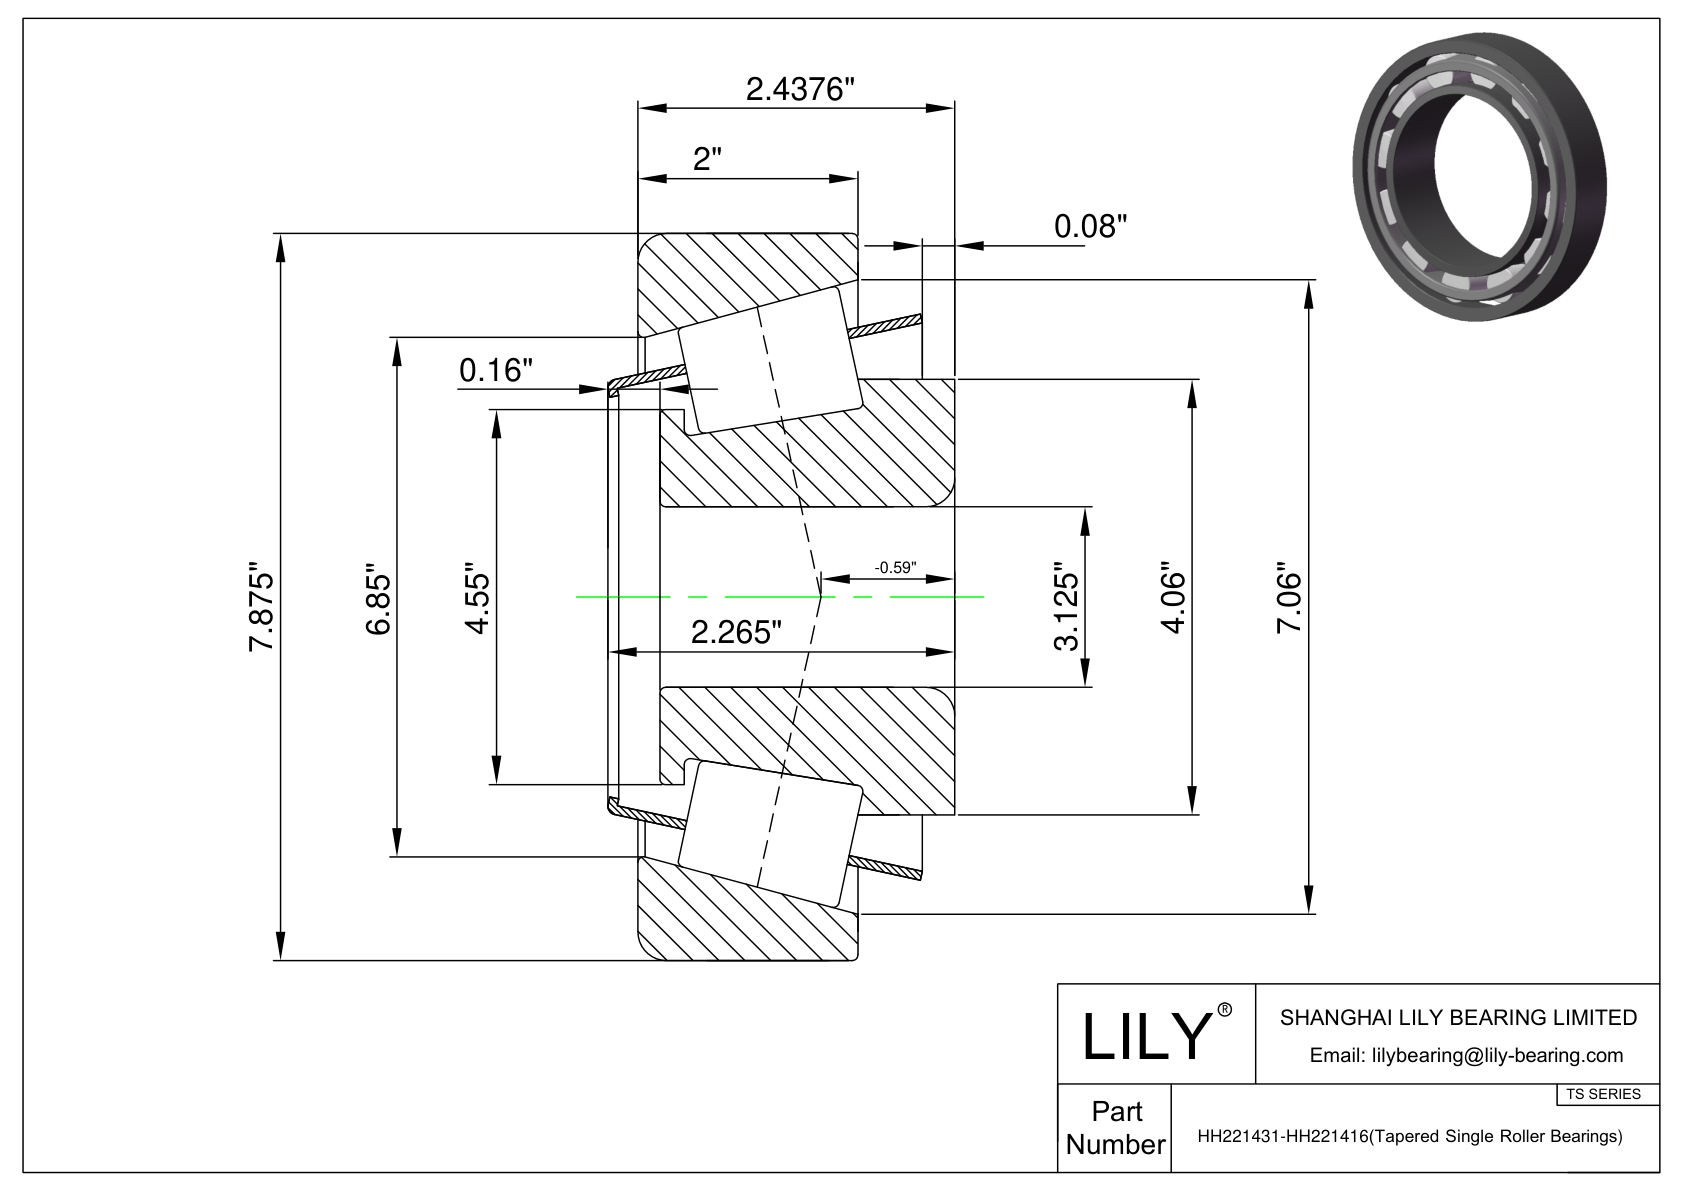 HH221431-HH221416 TS (Tapered Single Roller Bearings) (Imperial) cad drawing